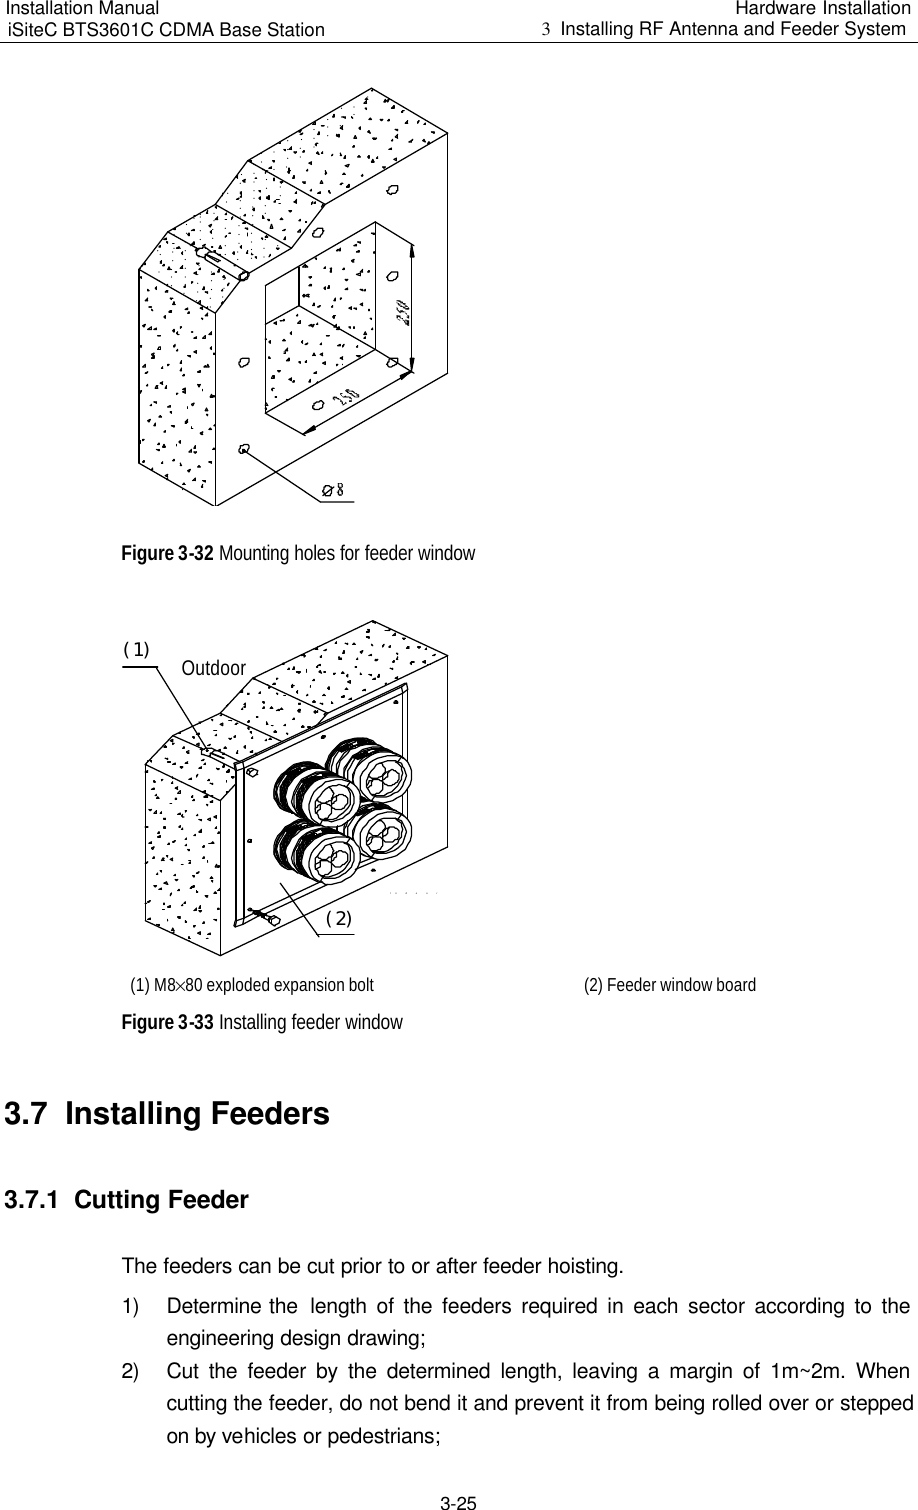 Installation Manual   iSiteC BTS3601C CDMA Base Station Hardware Installation 3  Installing RF Antenna and Feeder System  3-25  Figure 3-32 Mounting holes for feeder window IndoorOutdoor（１）（２） (1) M8%80 exploded expansion bolt   (2) Feeder window board Figure 3-33 Installing feeder window 3.7  Installing Feeders 3.7.1  Cutting Feeder The feeders can be cut prior to or after feeder hoisting. 1) Determine the  length of the feeders required in each sector according to the engineering design drawing; 2) Cut the feeder by the determined length, leaving a margin of 1m~2m. When cutting the feeder, do not bend it and prevent it from being rolled over or stepped on by vehicles or pedestrians; 